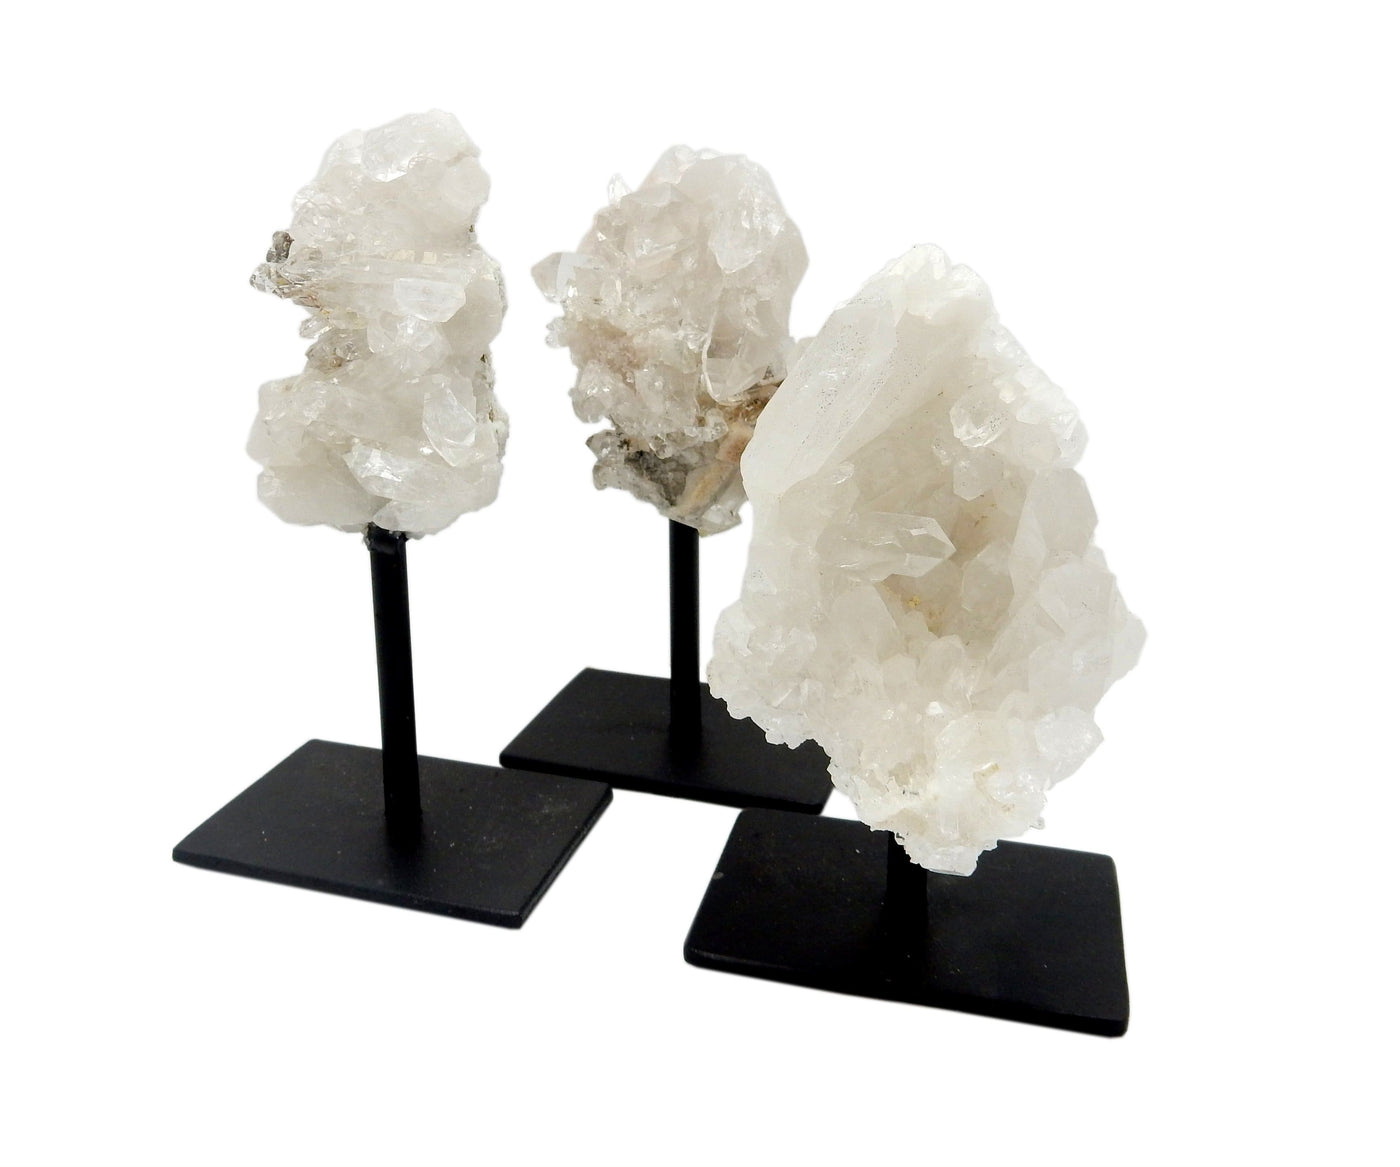 Three Crystal Quartz Cluster on metal stand, displayed on a white surface.